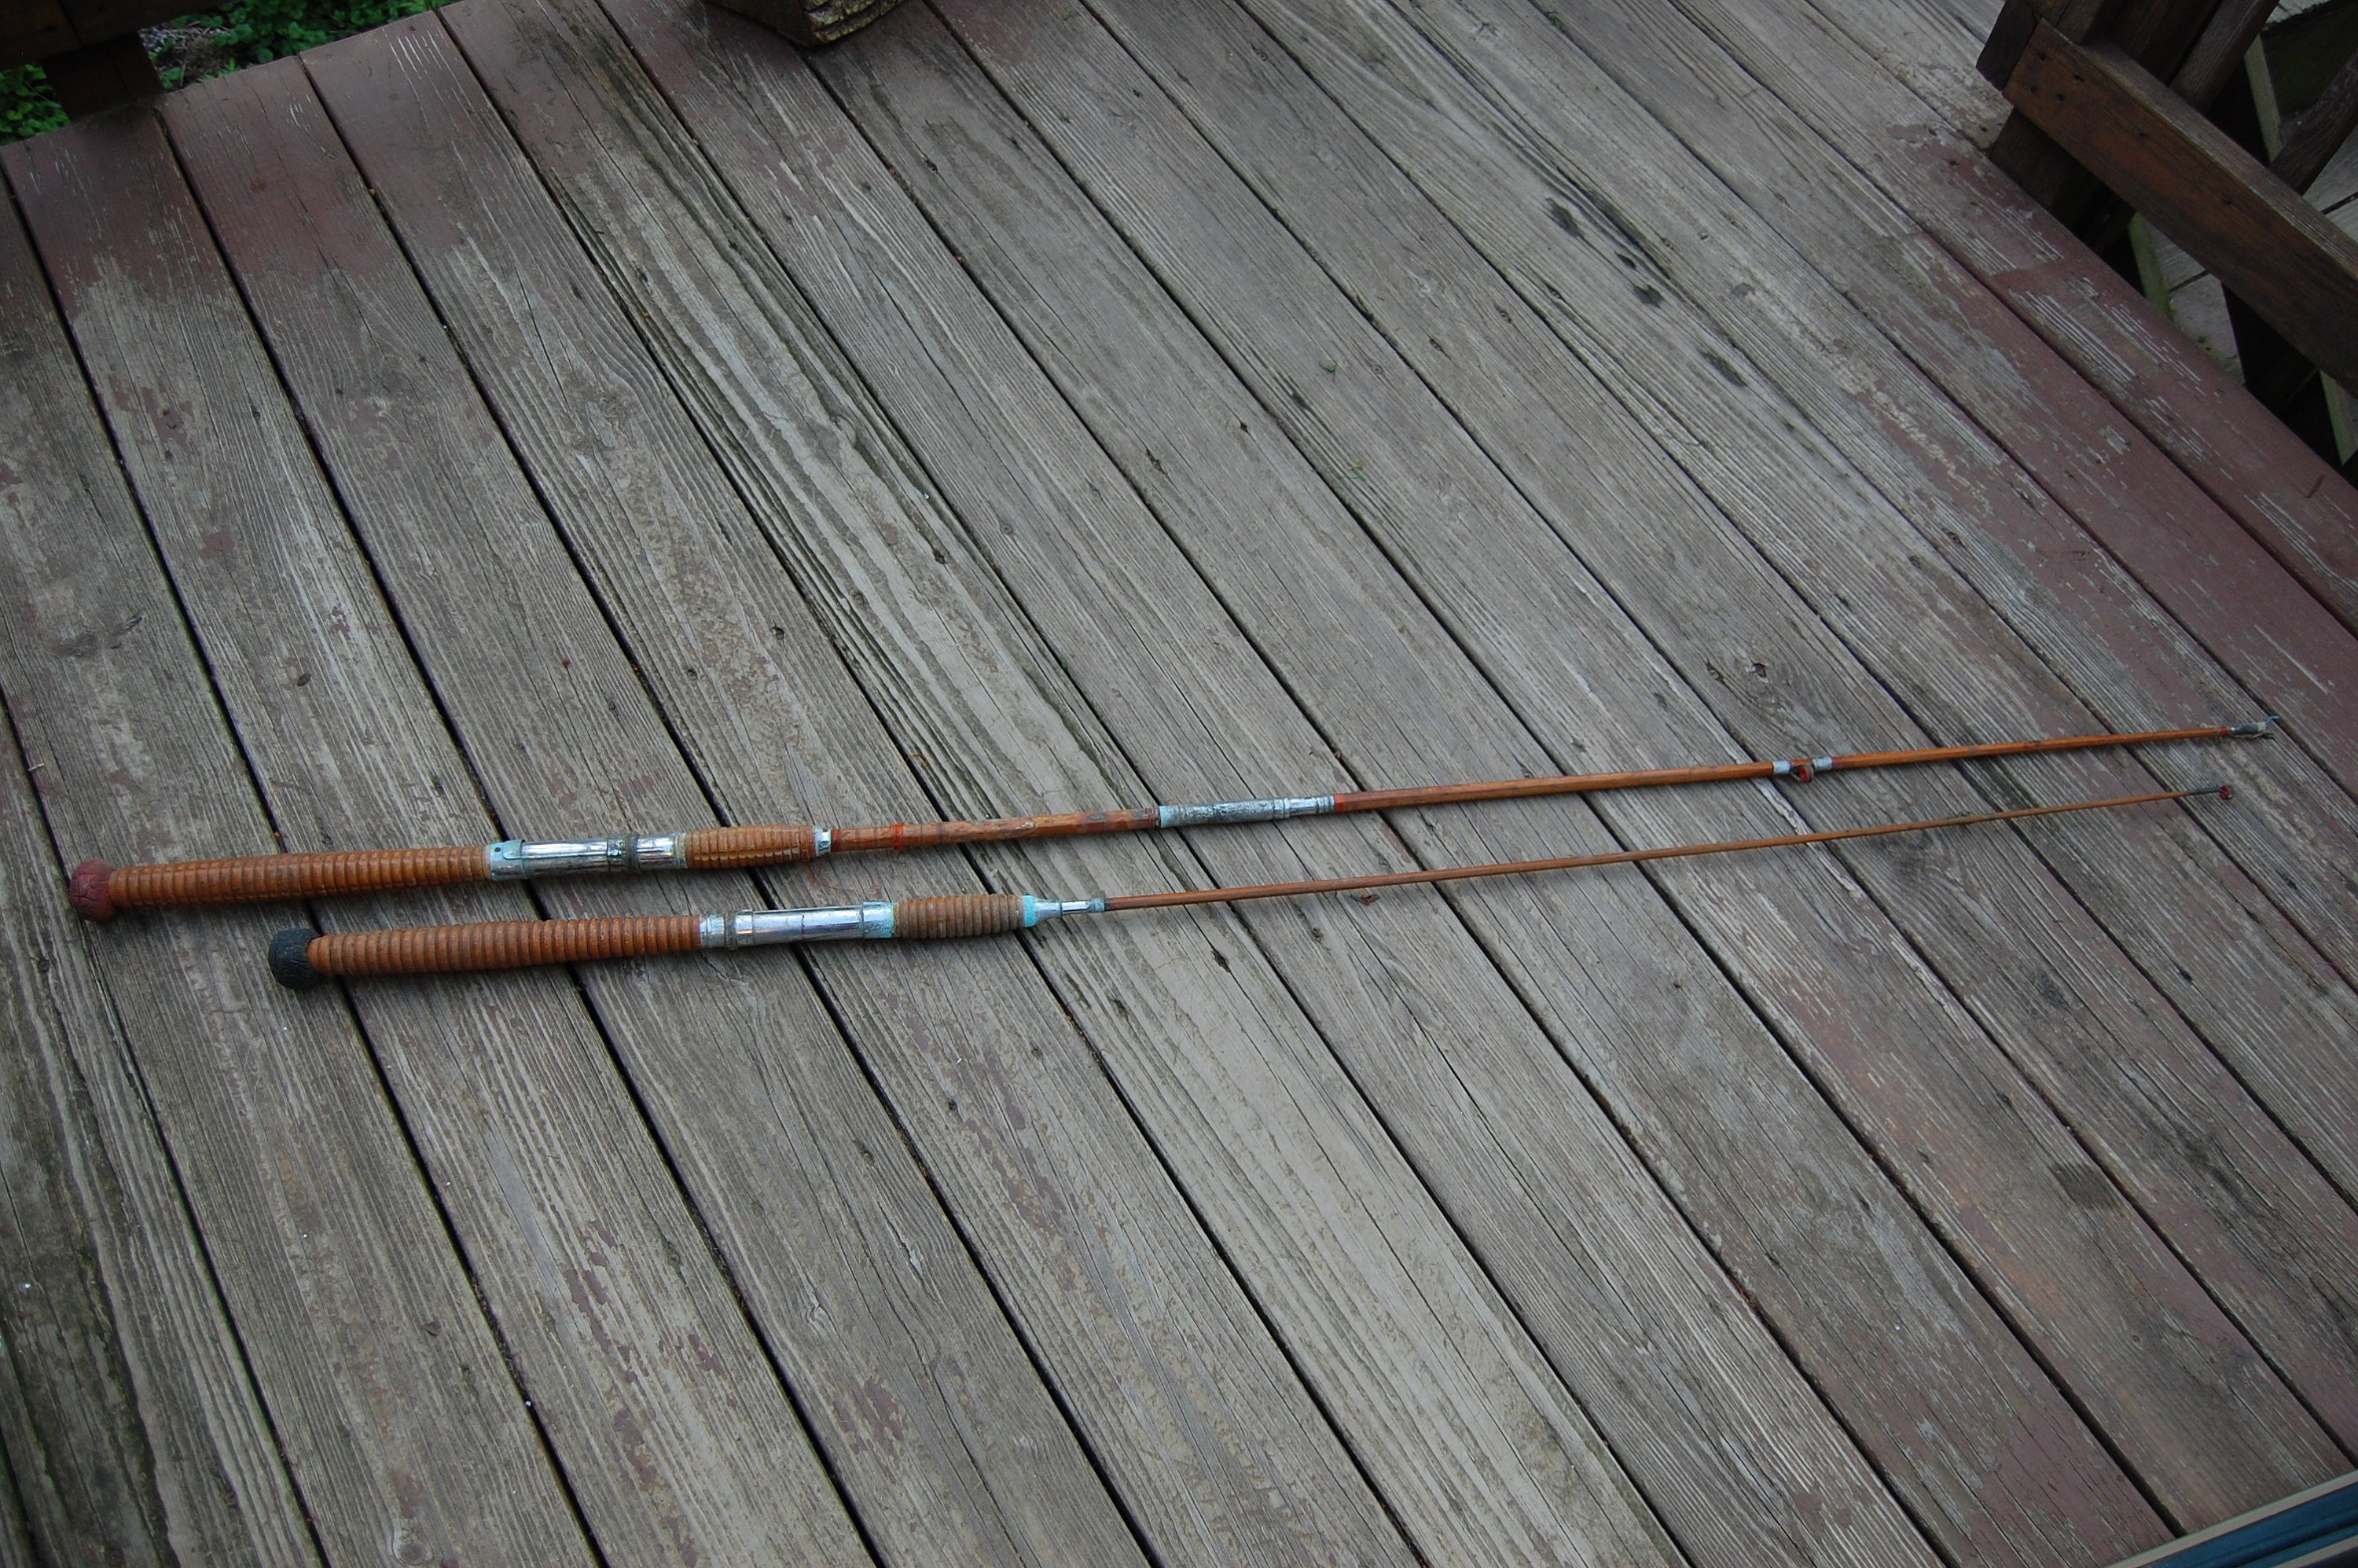 Antique Turned Wood Fishing Rods Poles 2 Vintage Boat Fishing Rods